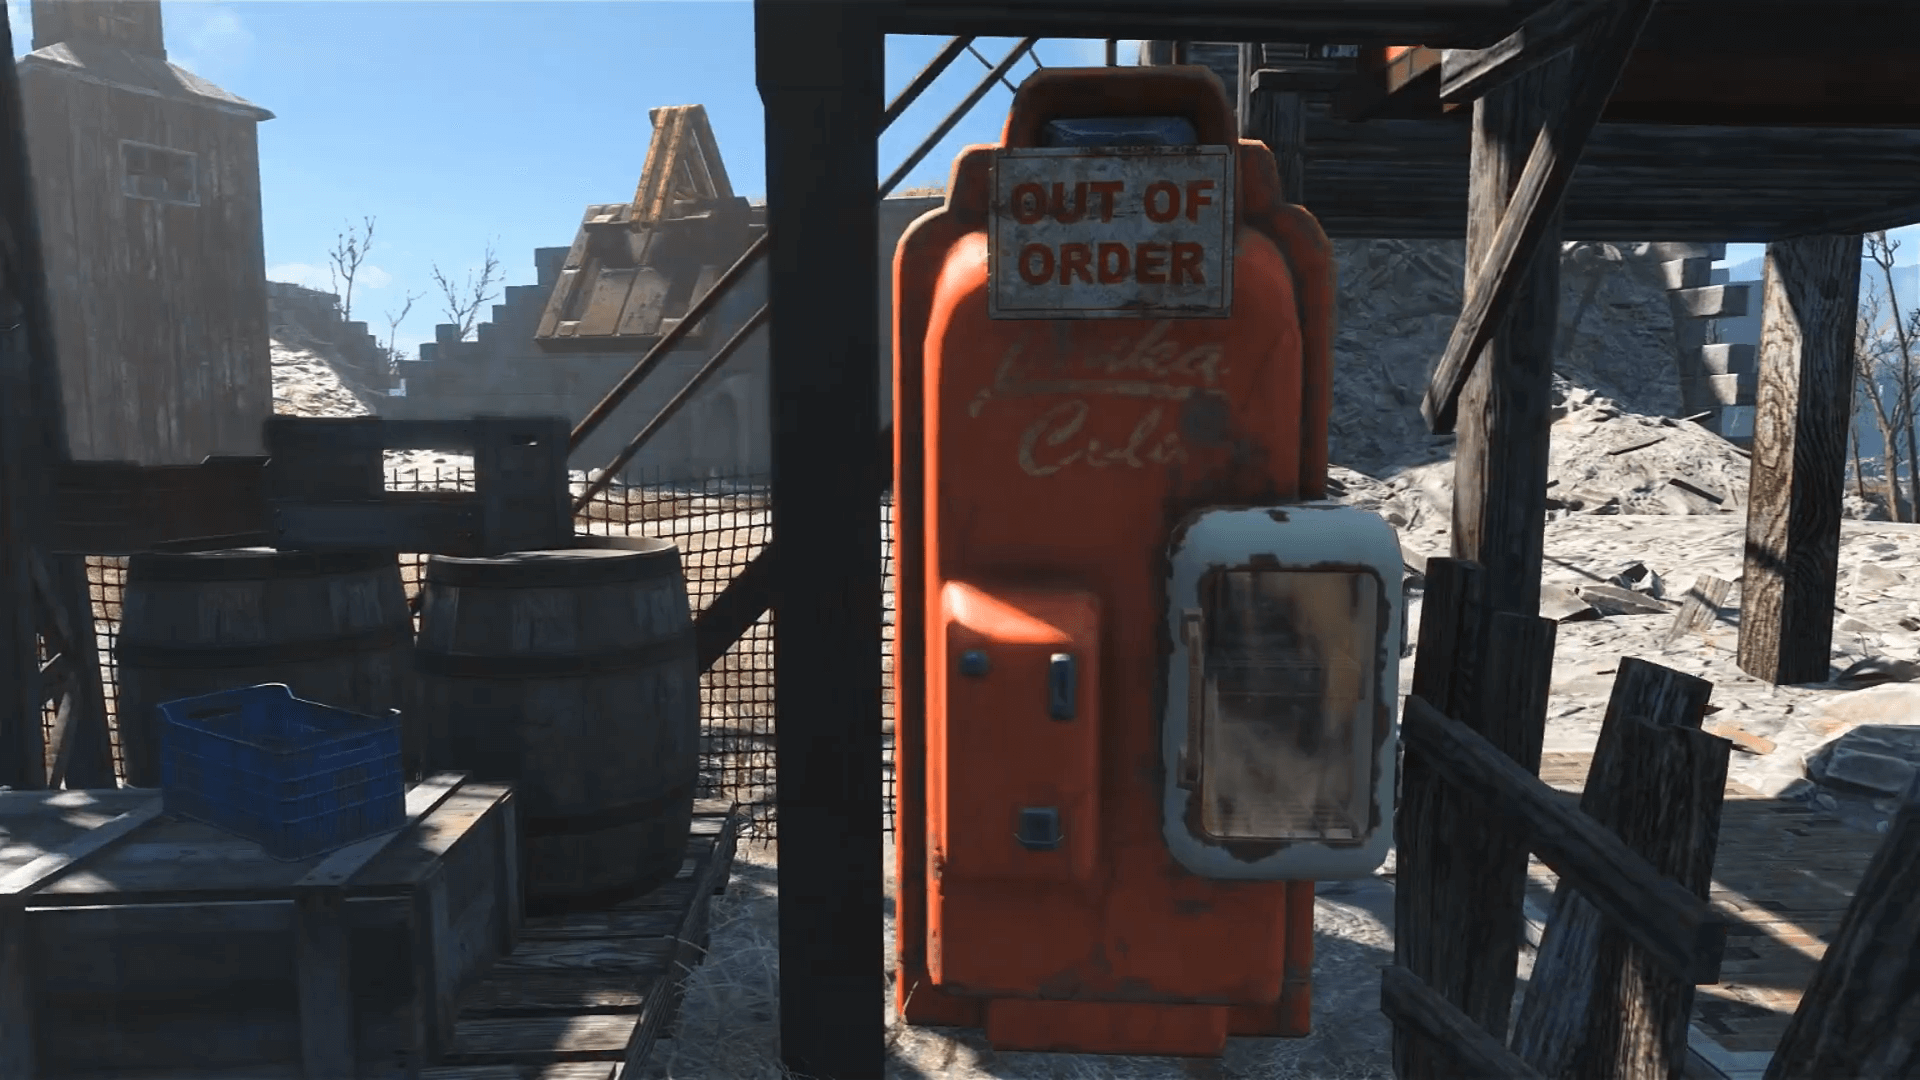 junk in Fallout 4